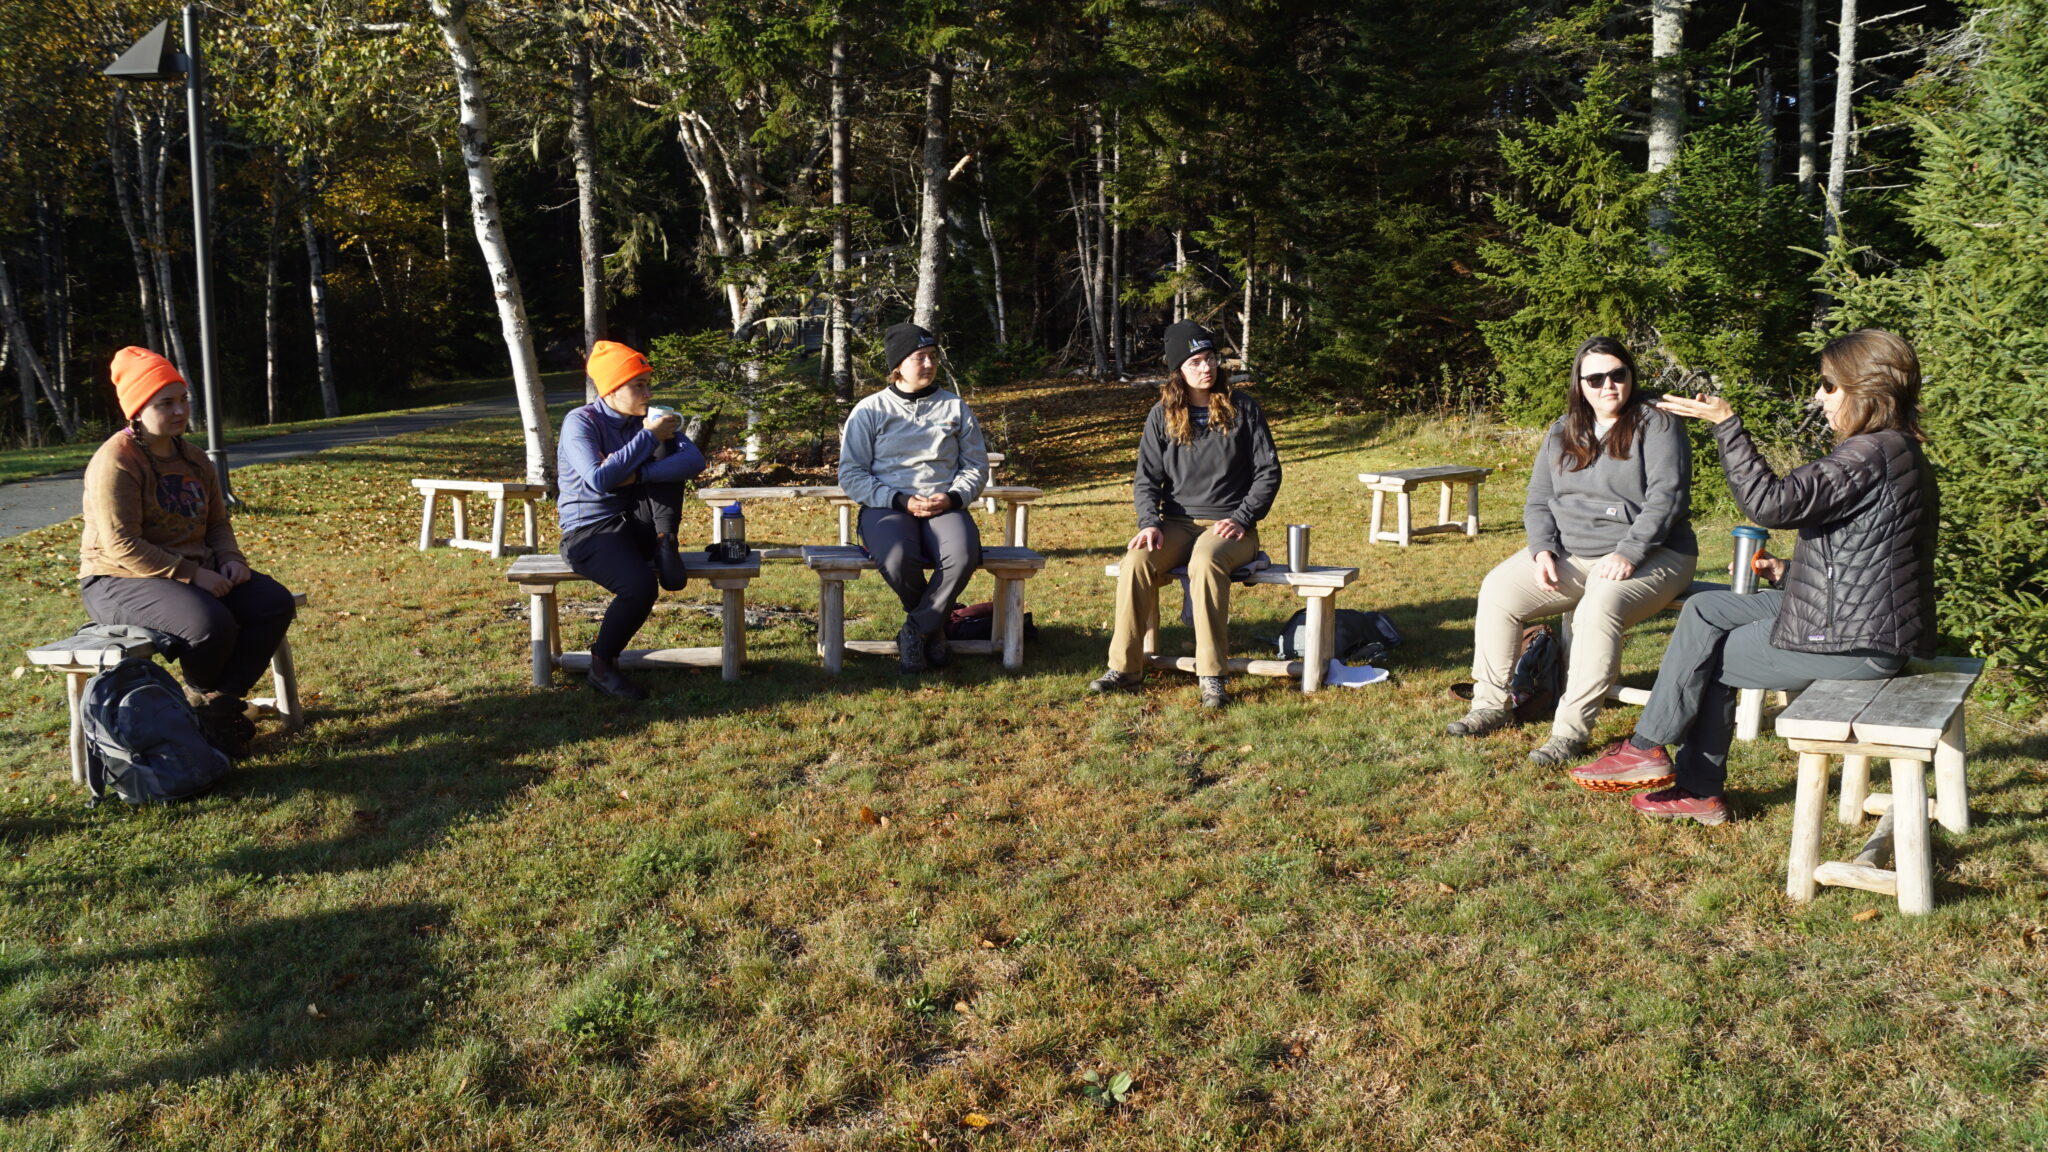 Group of people sitting outdoors on wooden benches in grassy area of Schoodic Institute campus.